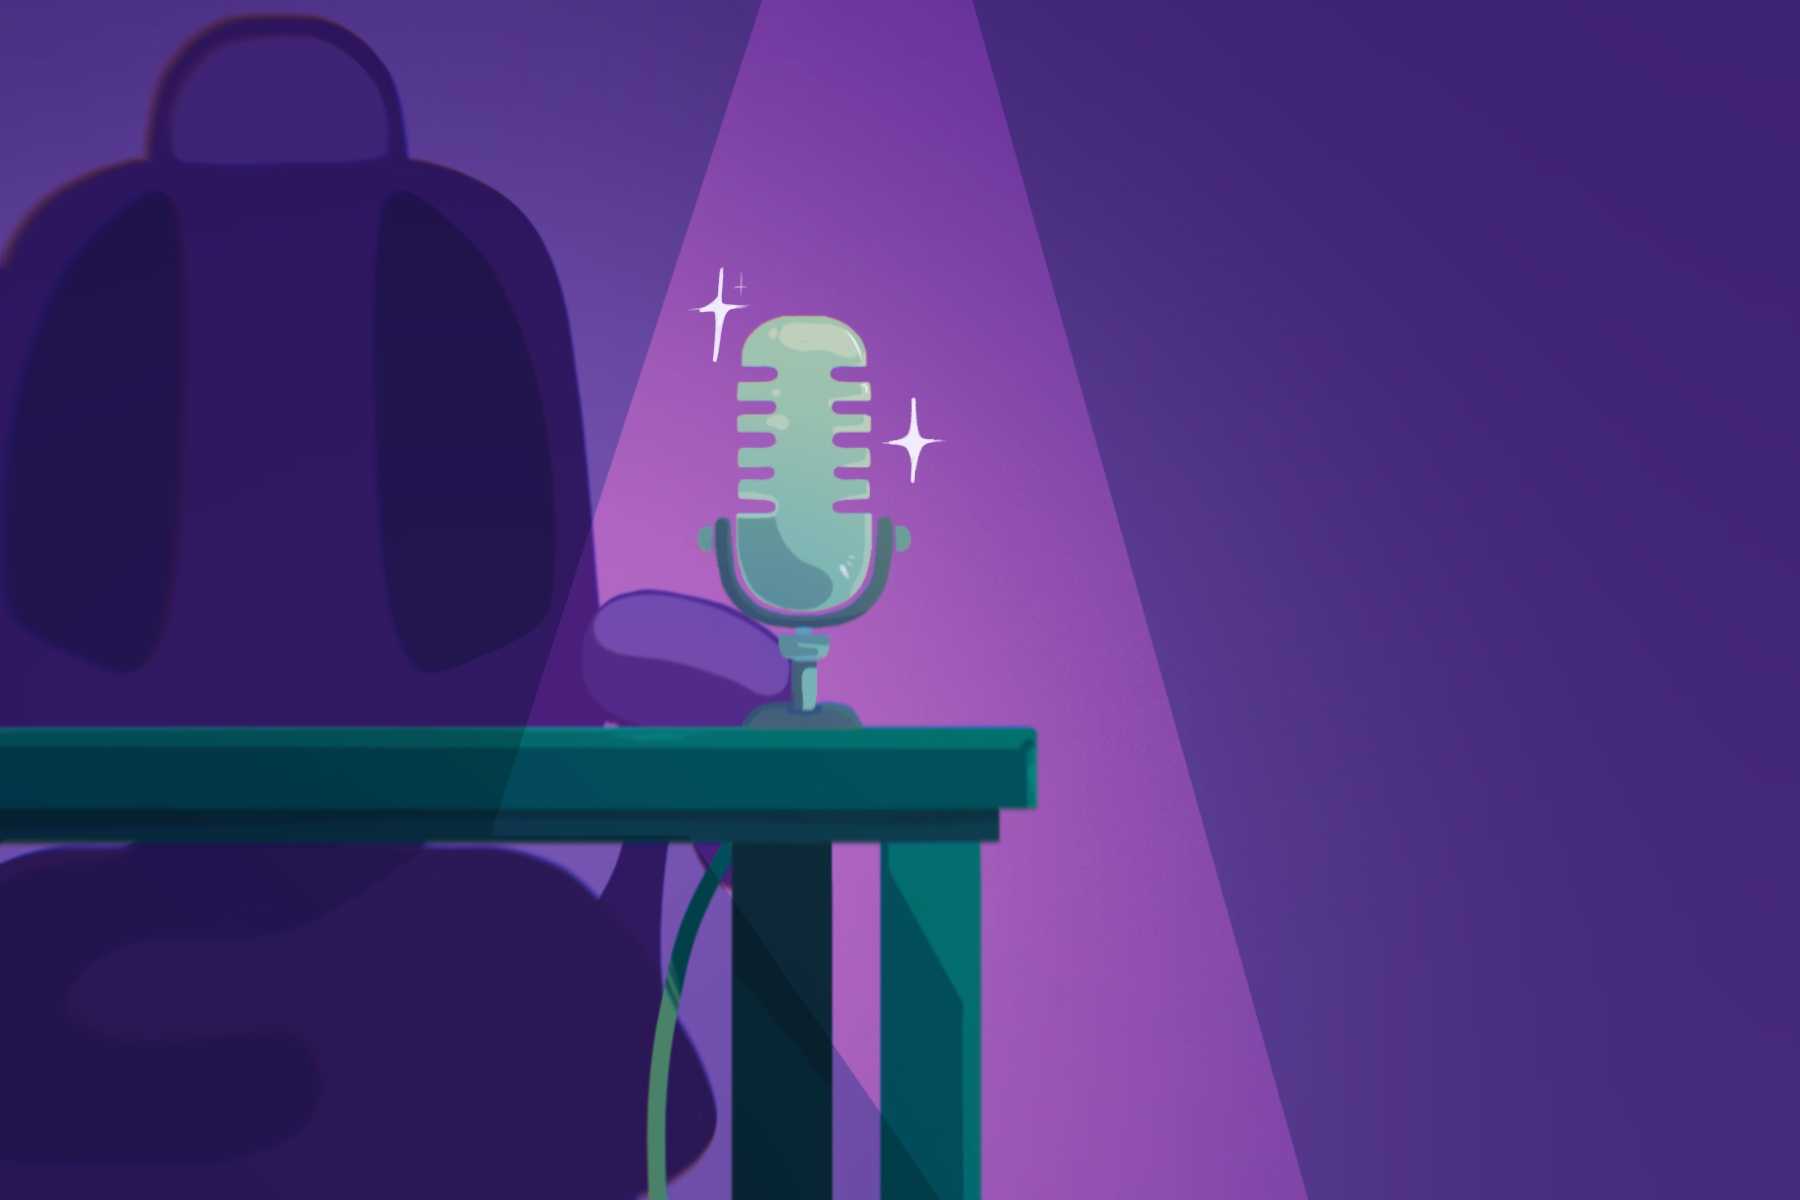 A drawing of podcasts shows a microphone shining against a purple background.